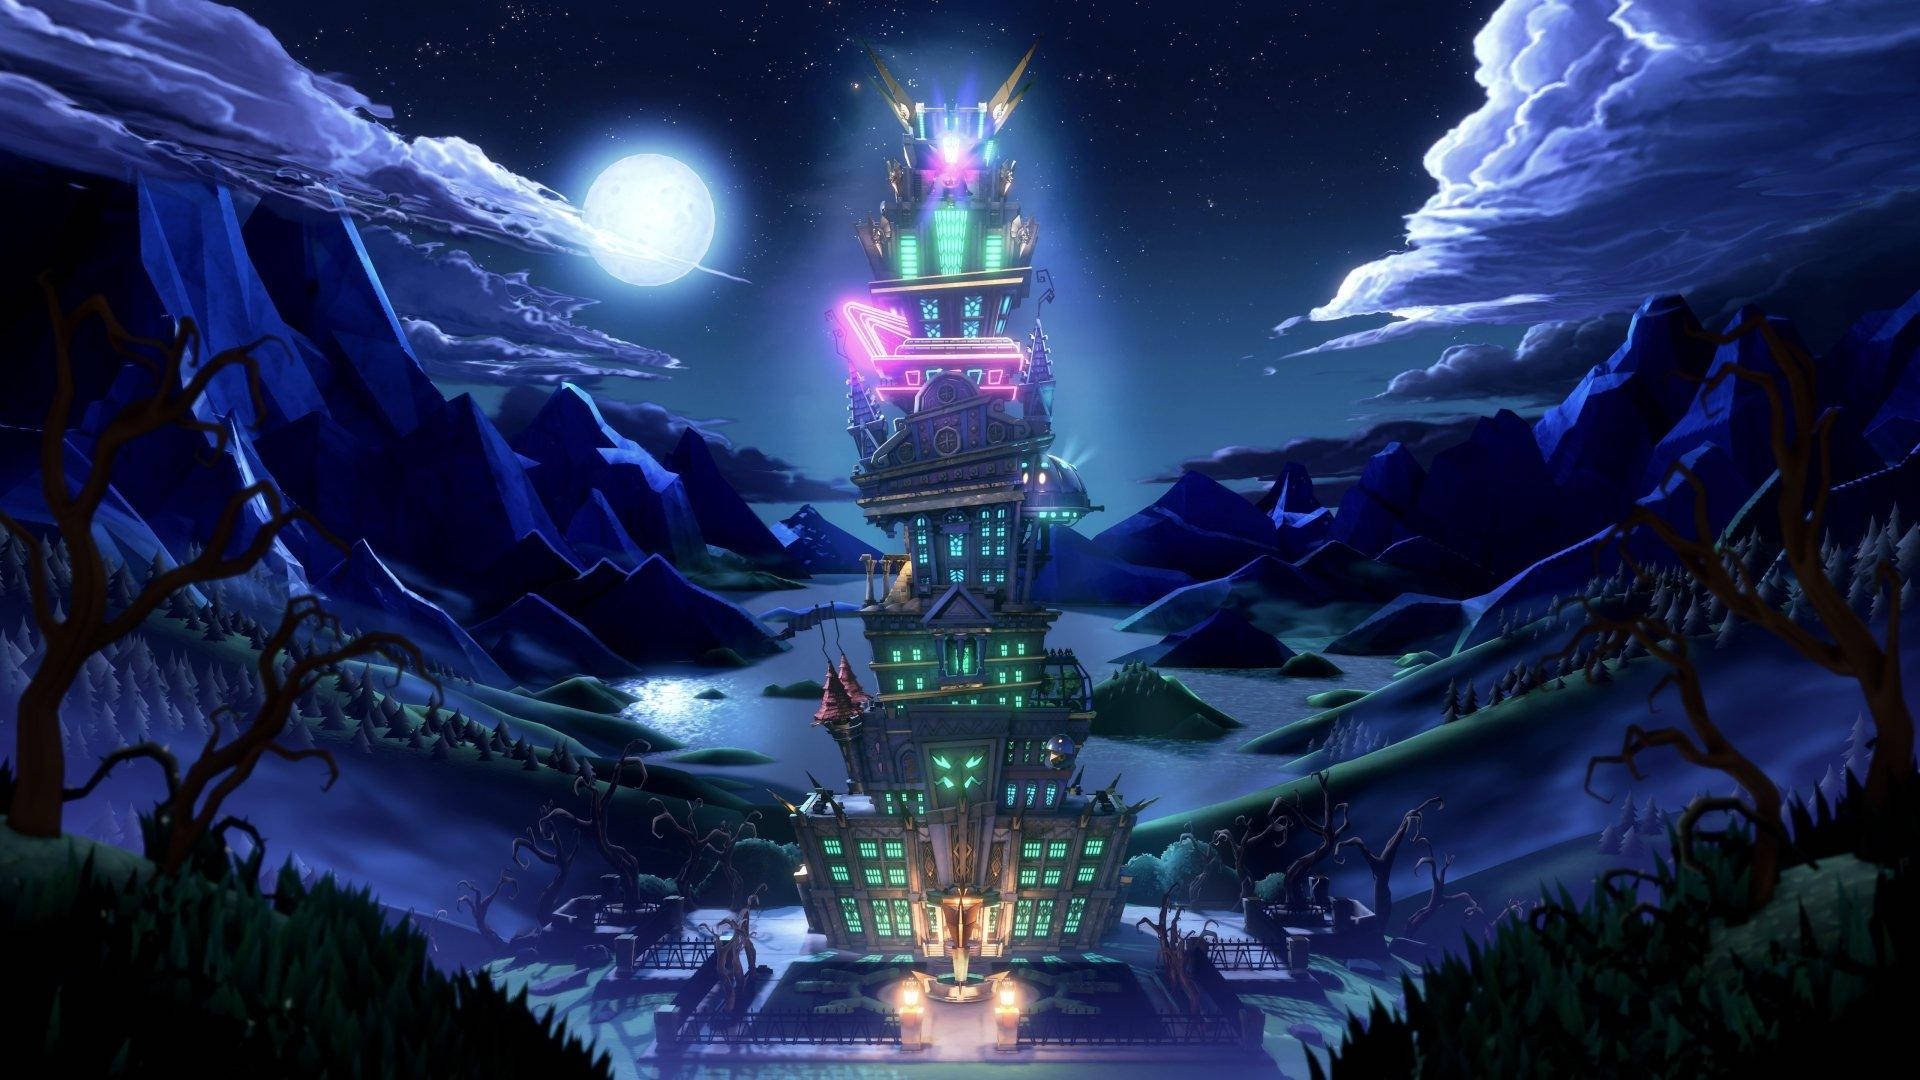 Luigi's Mansion 3 Tall Mansion In The Mountains Background